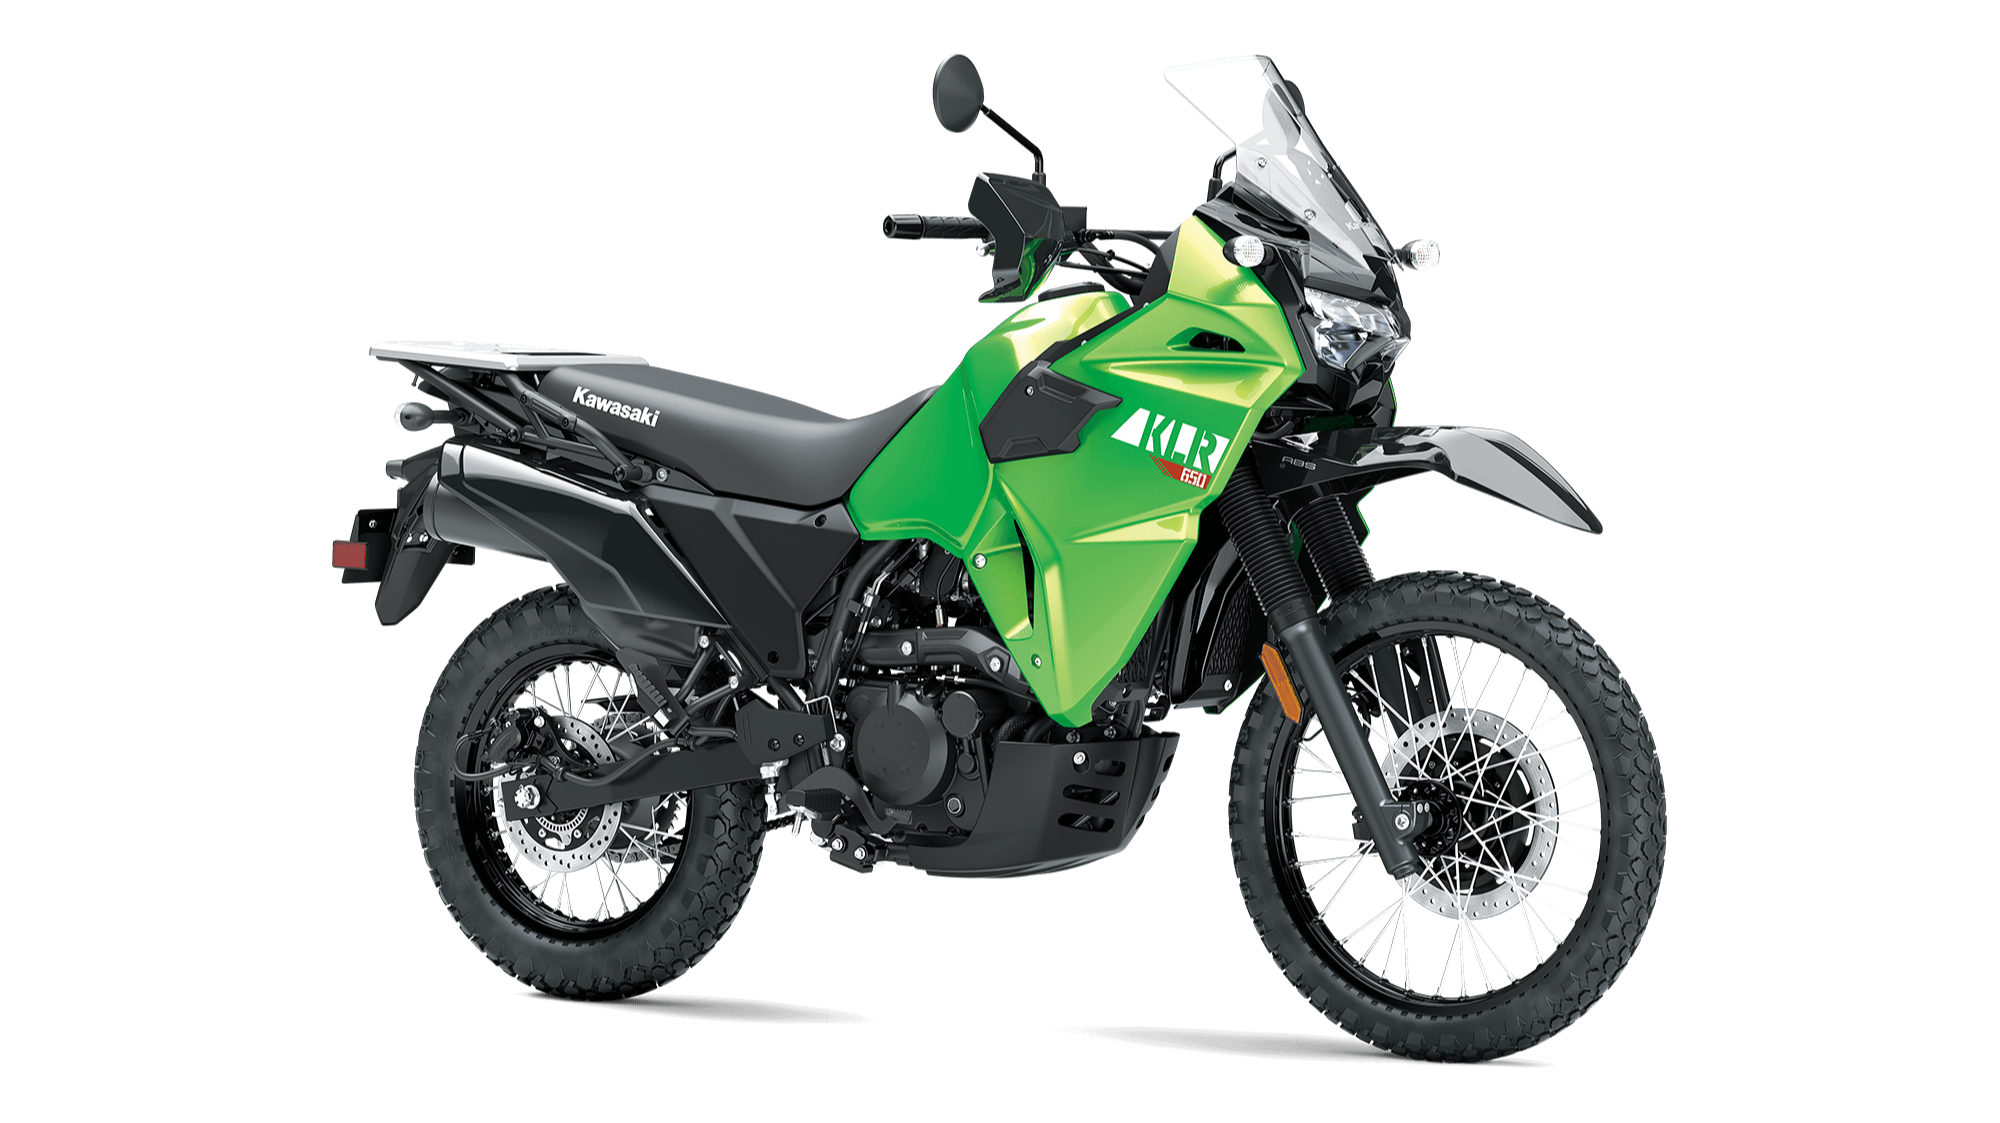 KLR®650:LEARN MORE